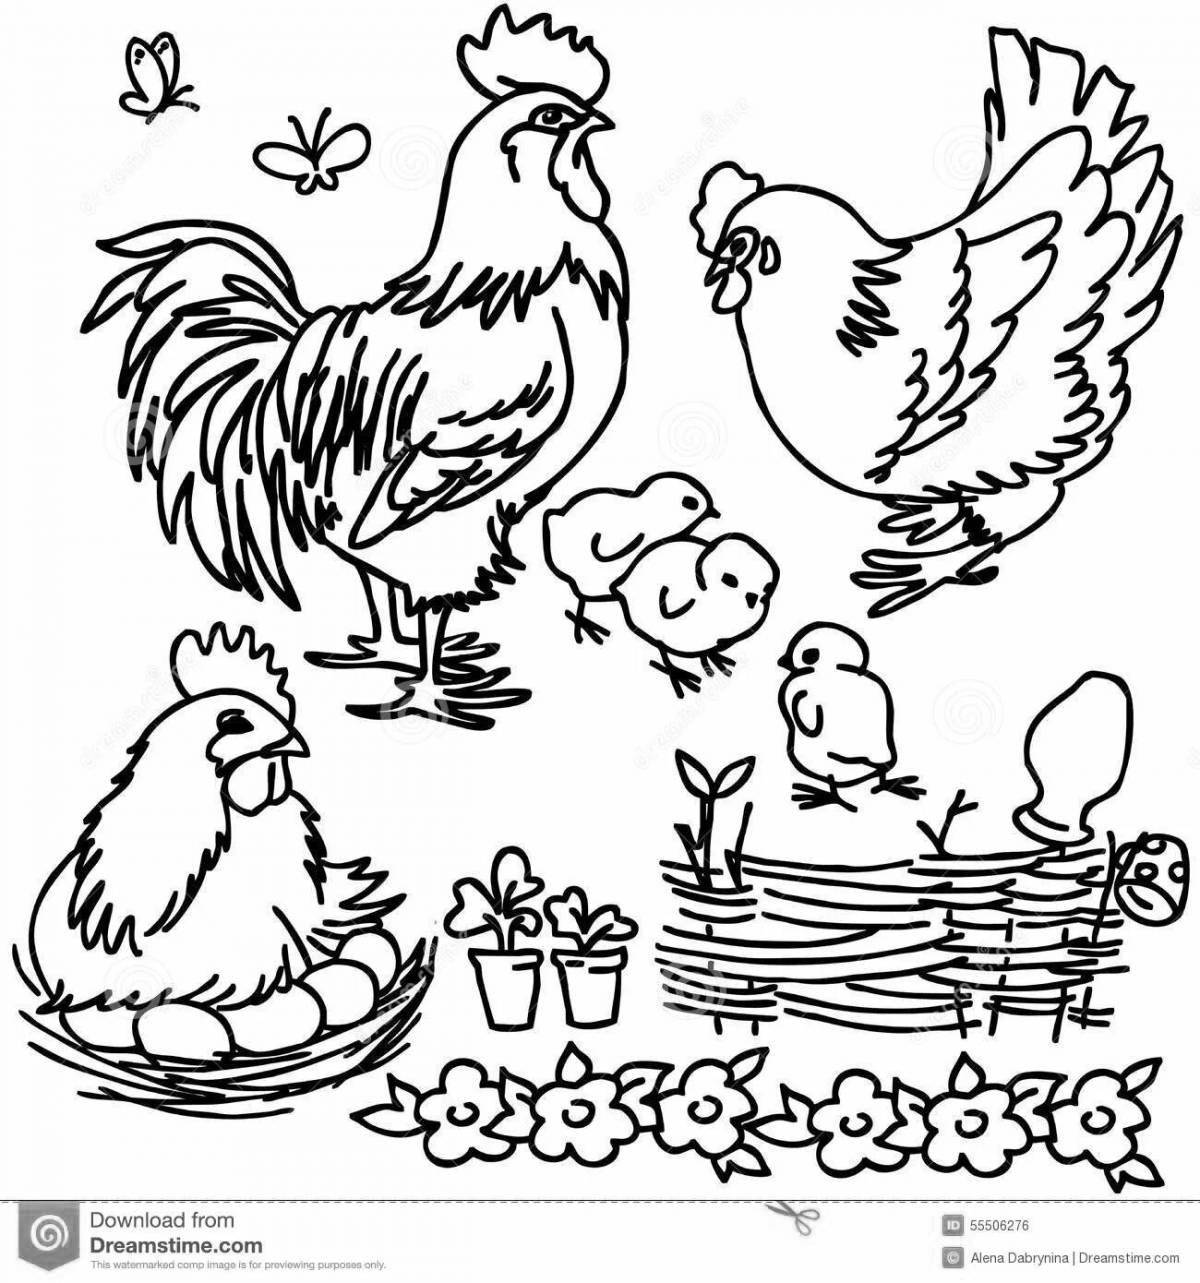 Innovative bird coloring page for 6-7 year olds